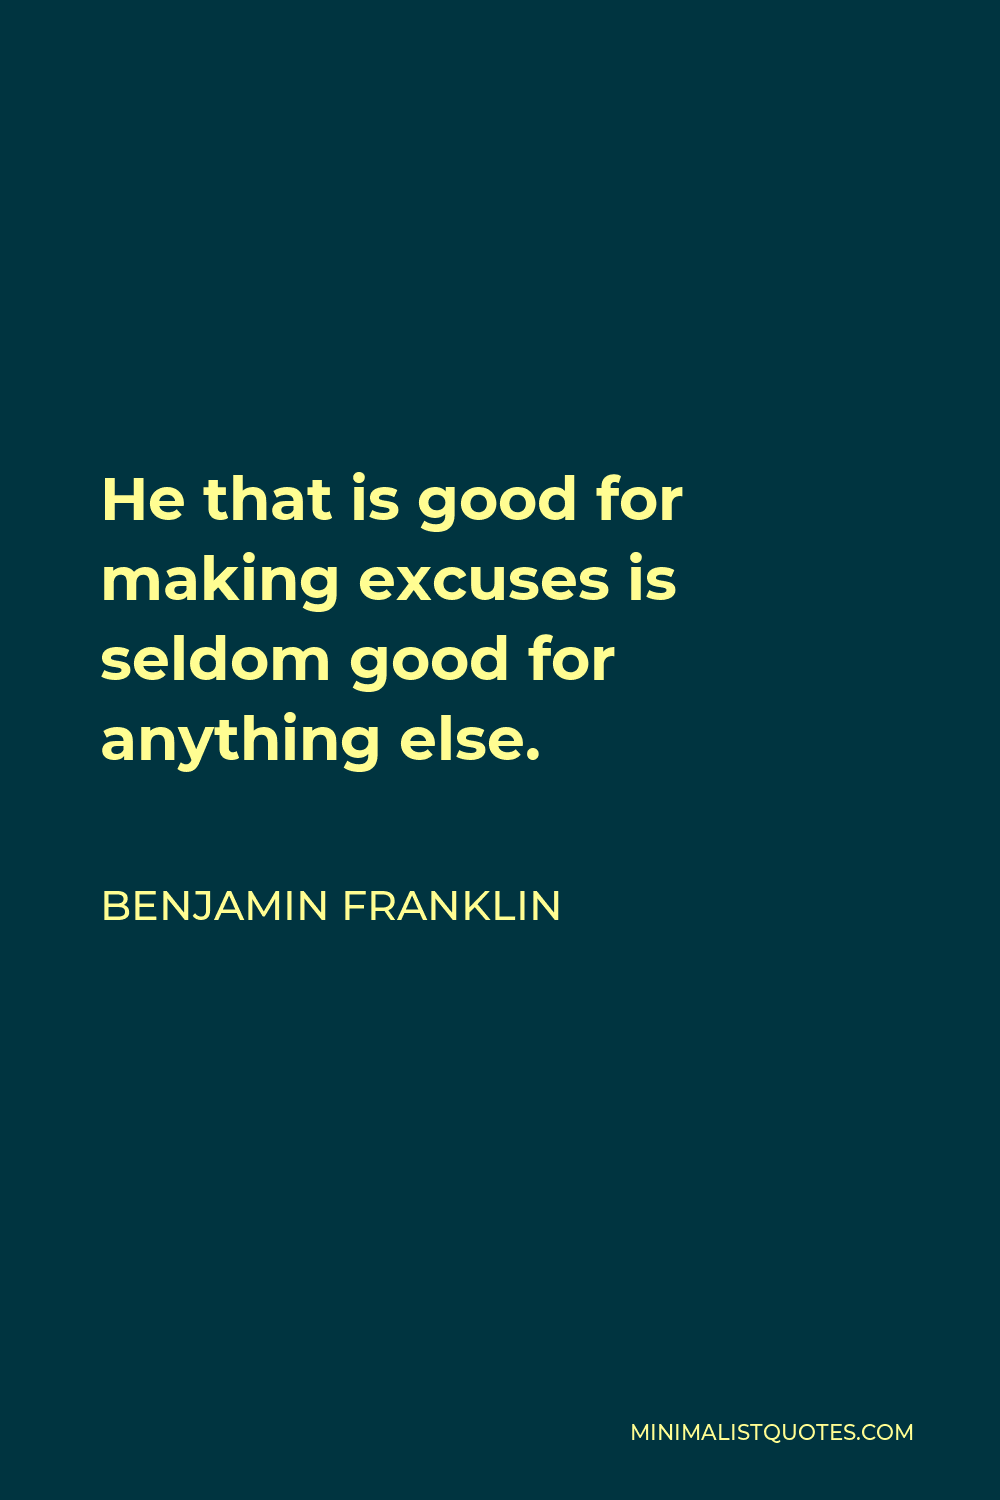 Benjamin Franklin Quote - He that is good for making excuses is seldom good for anything else.